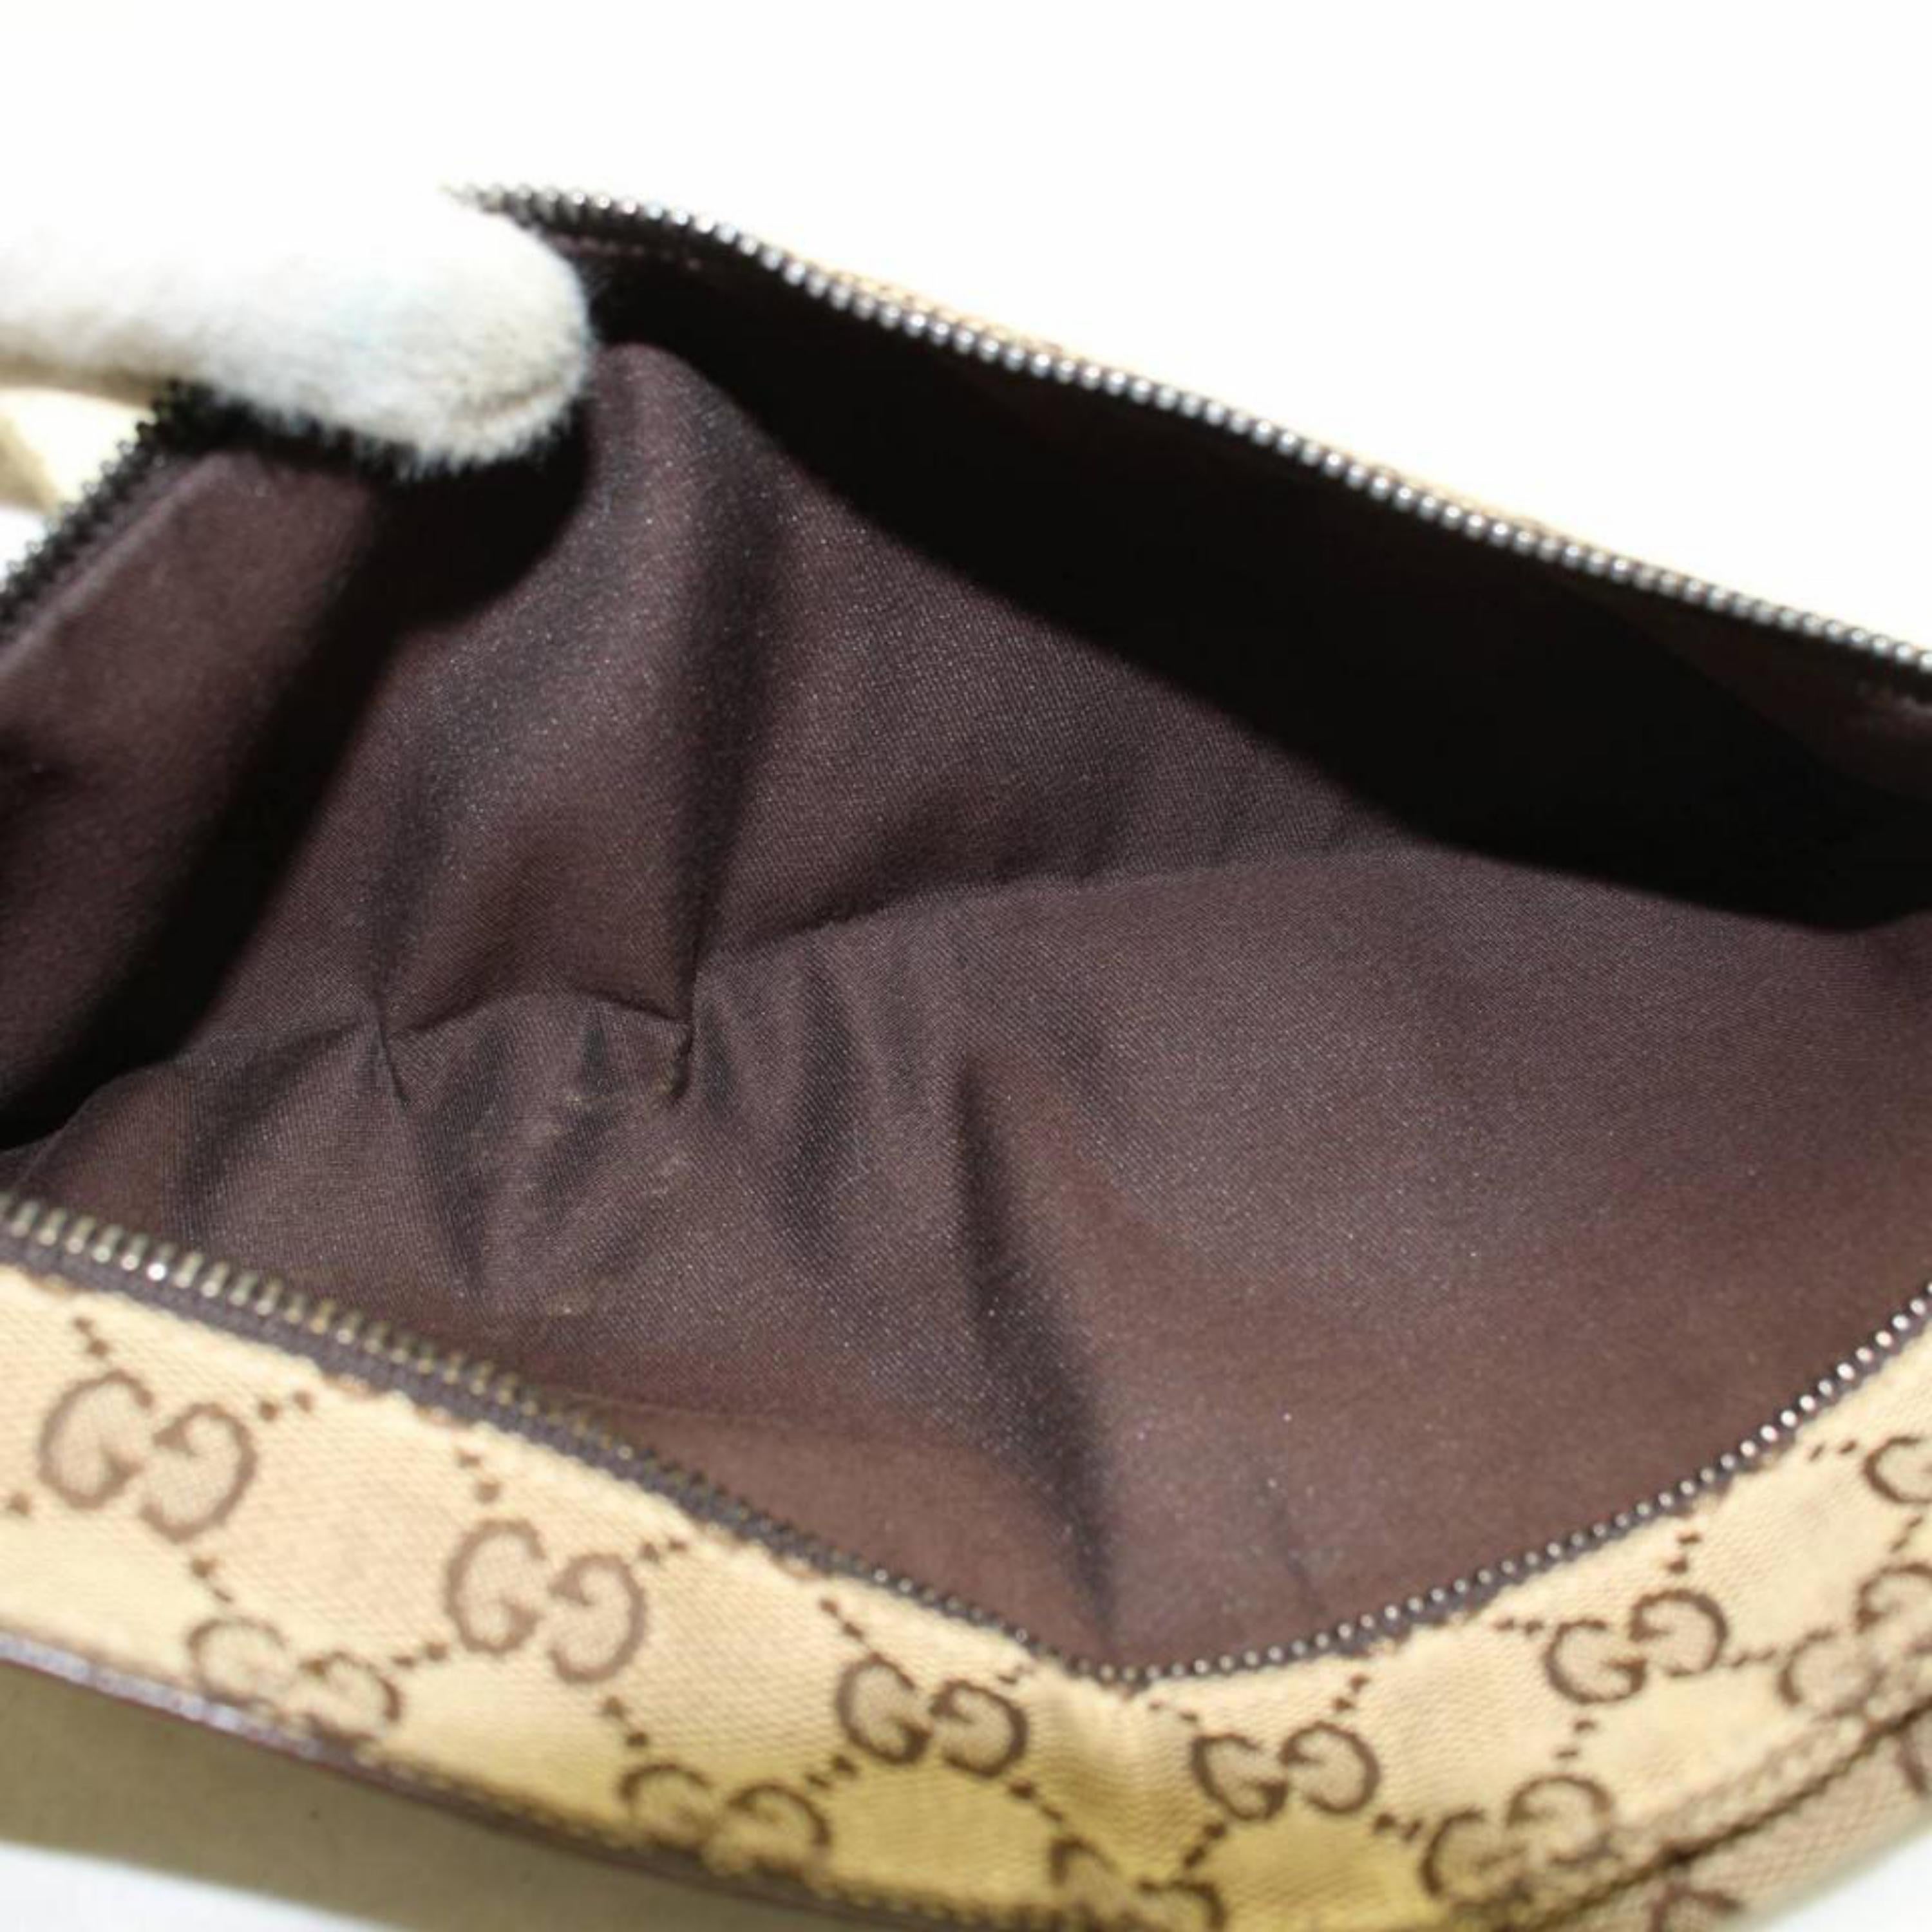 Gucci Monogram Gg Waist Pouch Fanny Pack 868298 Brown Canvas Cross Body Bag In Good Condition For Sale In Forest Hills, NY